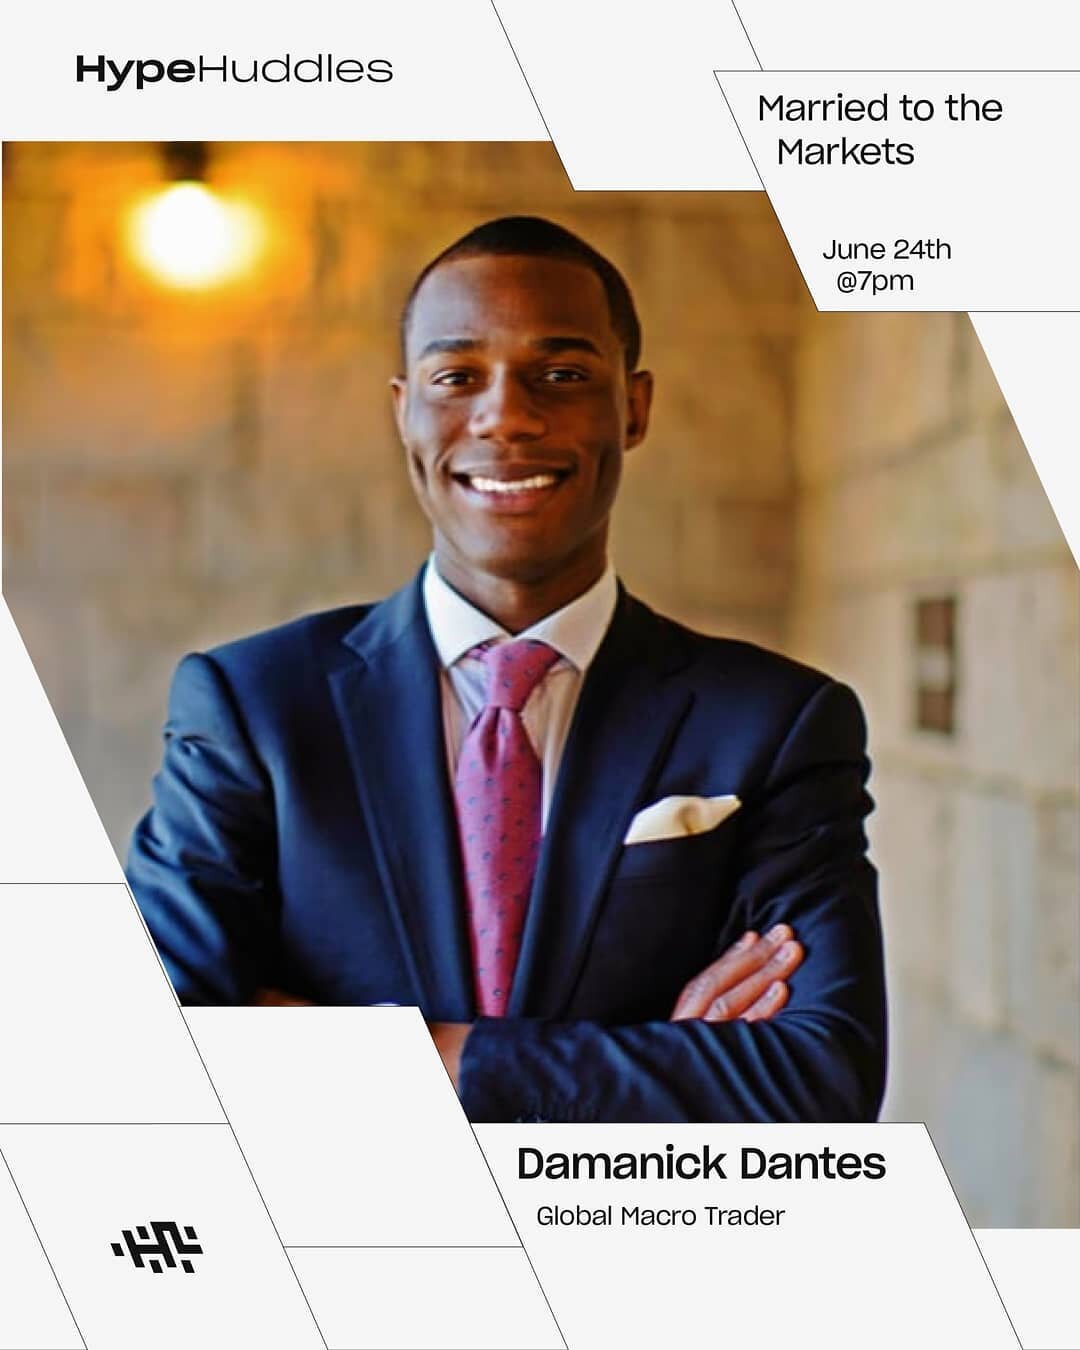 In this week's HypeHuddle we are talking all things market related with our guest, Global Macro Trader, Damanick Dantes.
.
This Thursday's&nbsp;HypeHuddle&nbsp;will introduce Damanick Dantes, a Bronx native who had a passion for the stock market sinc